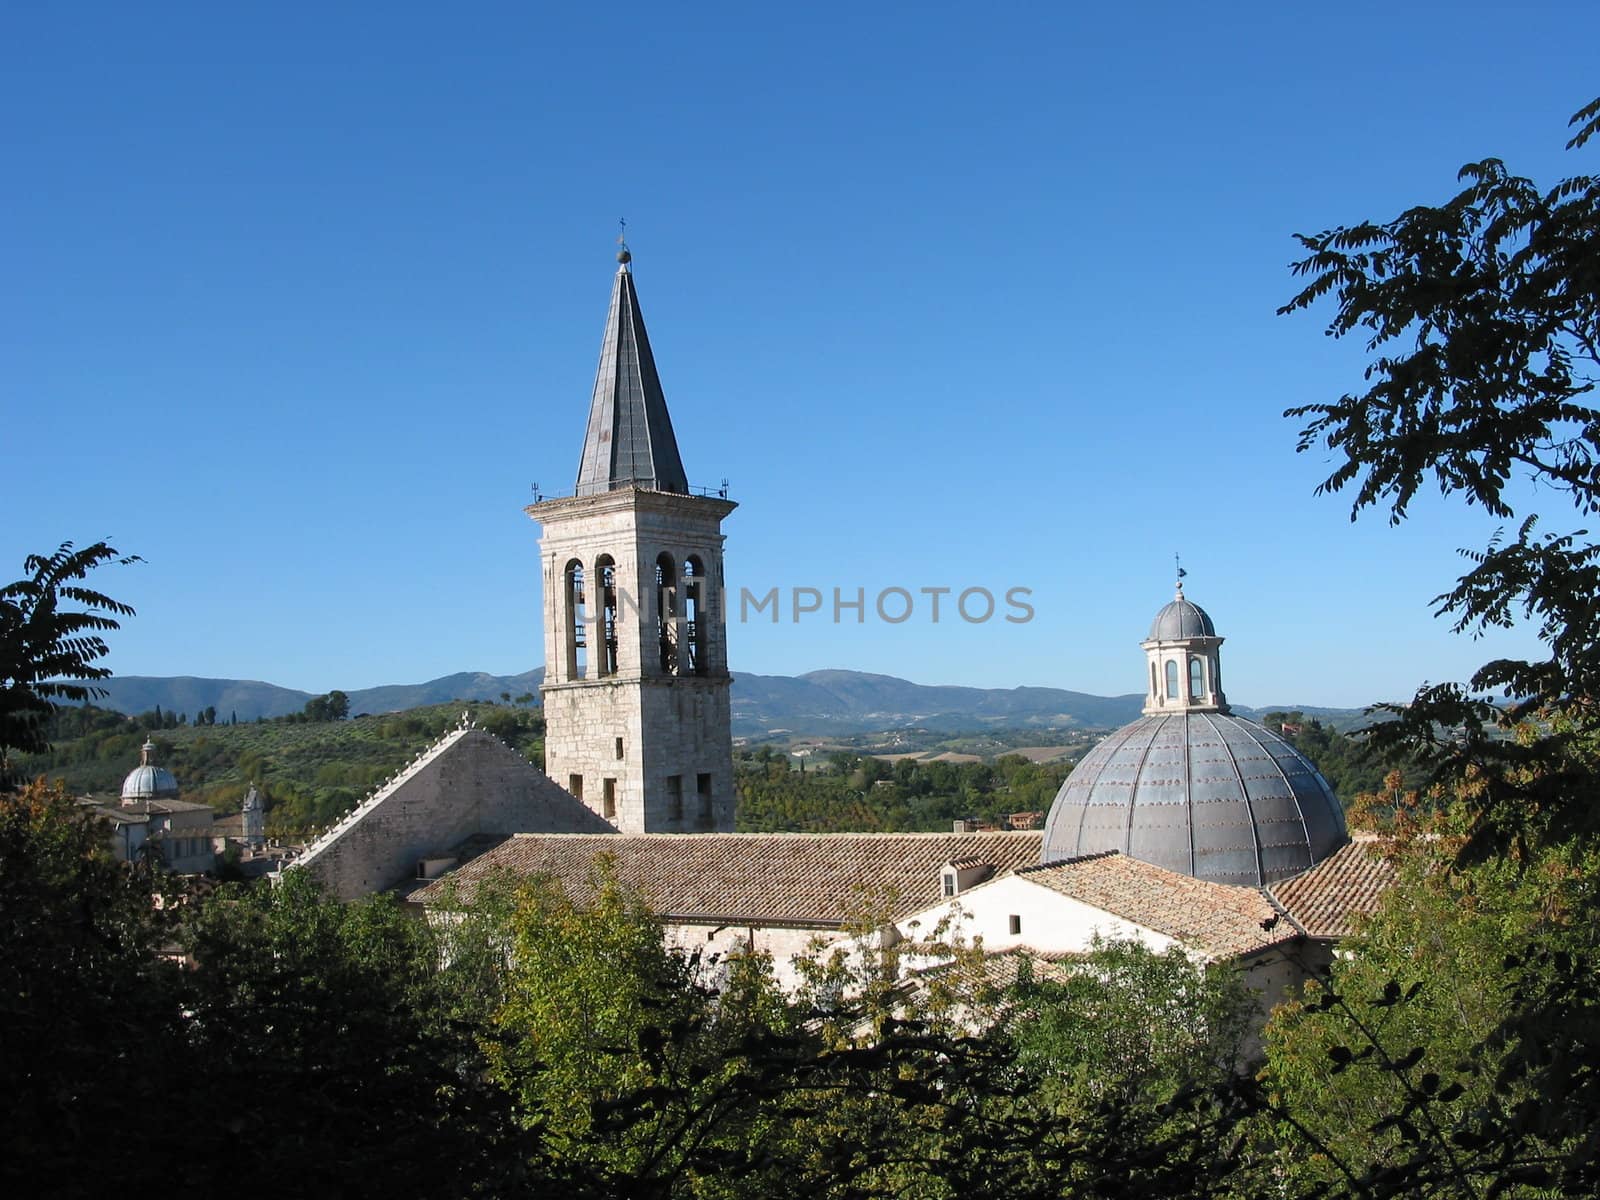 SPOLETO IS AN HISTORICAL ITALIAN TOWN FOUNDED BY THE ROMANS